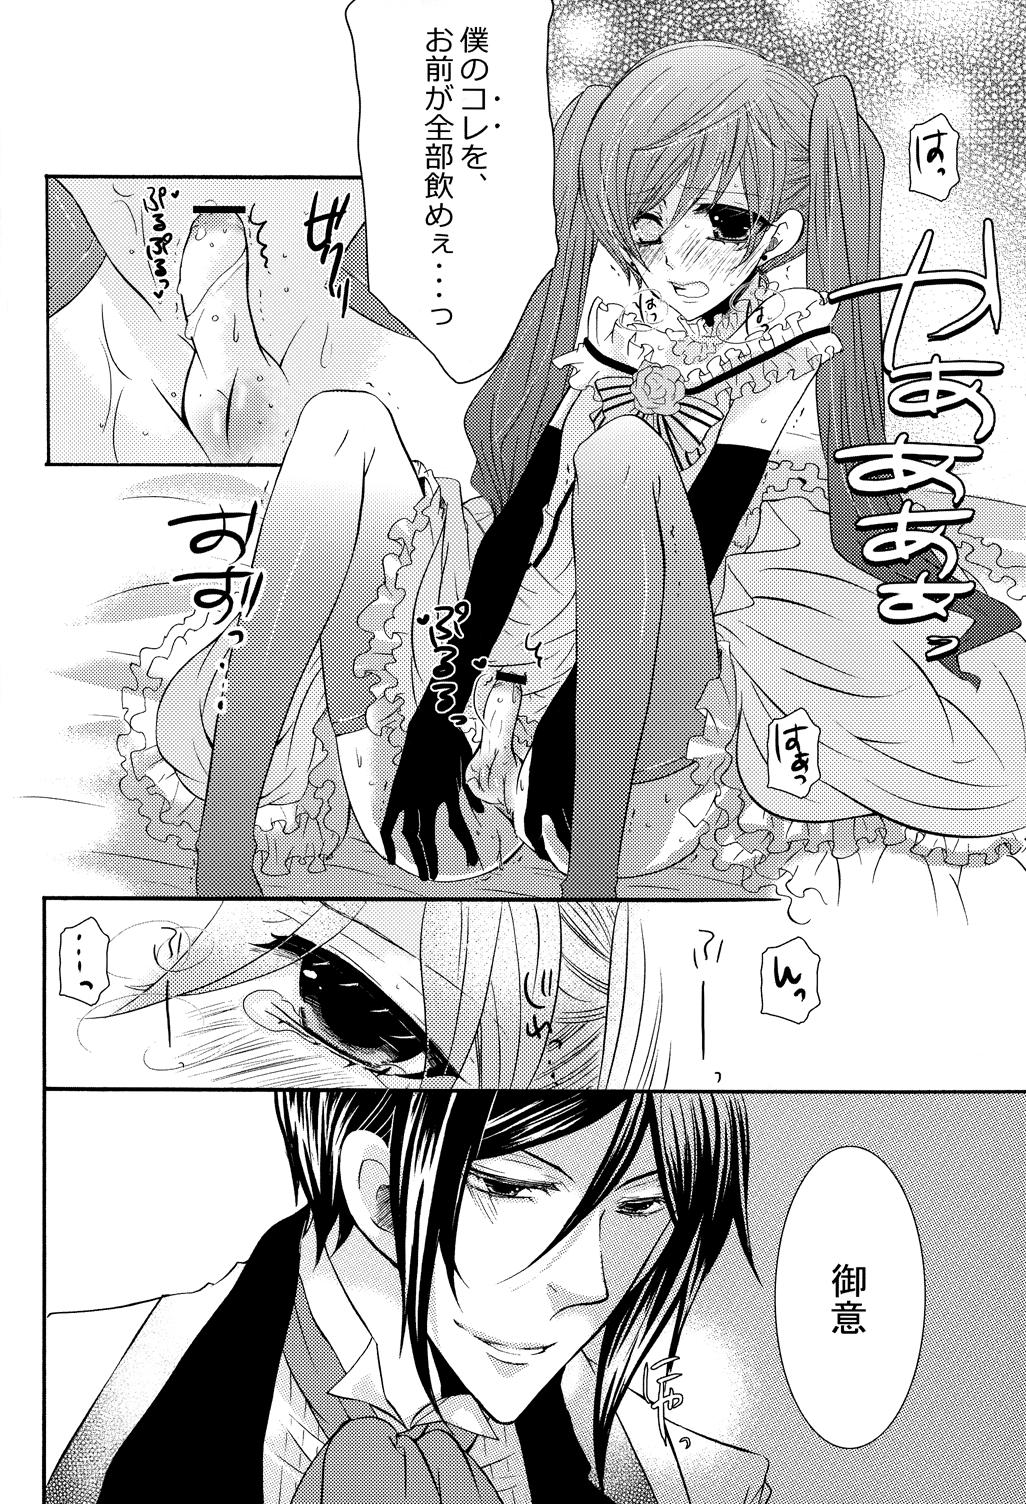 Curvy Charles - Black butler Style - Page 12